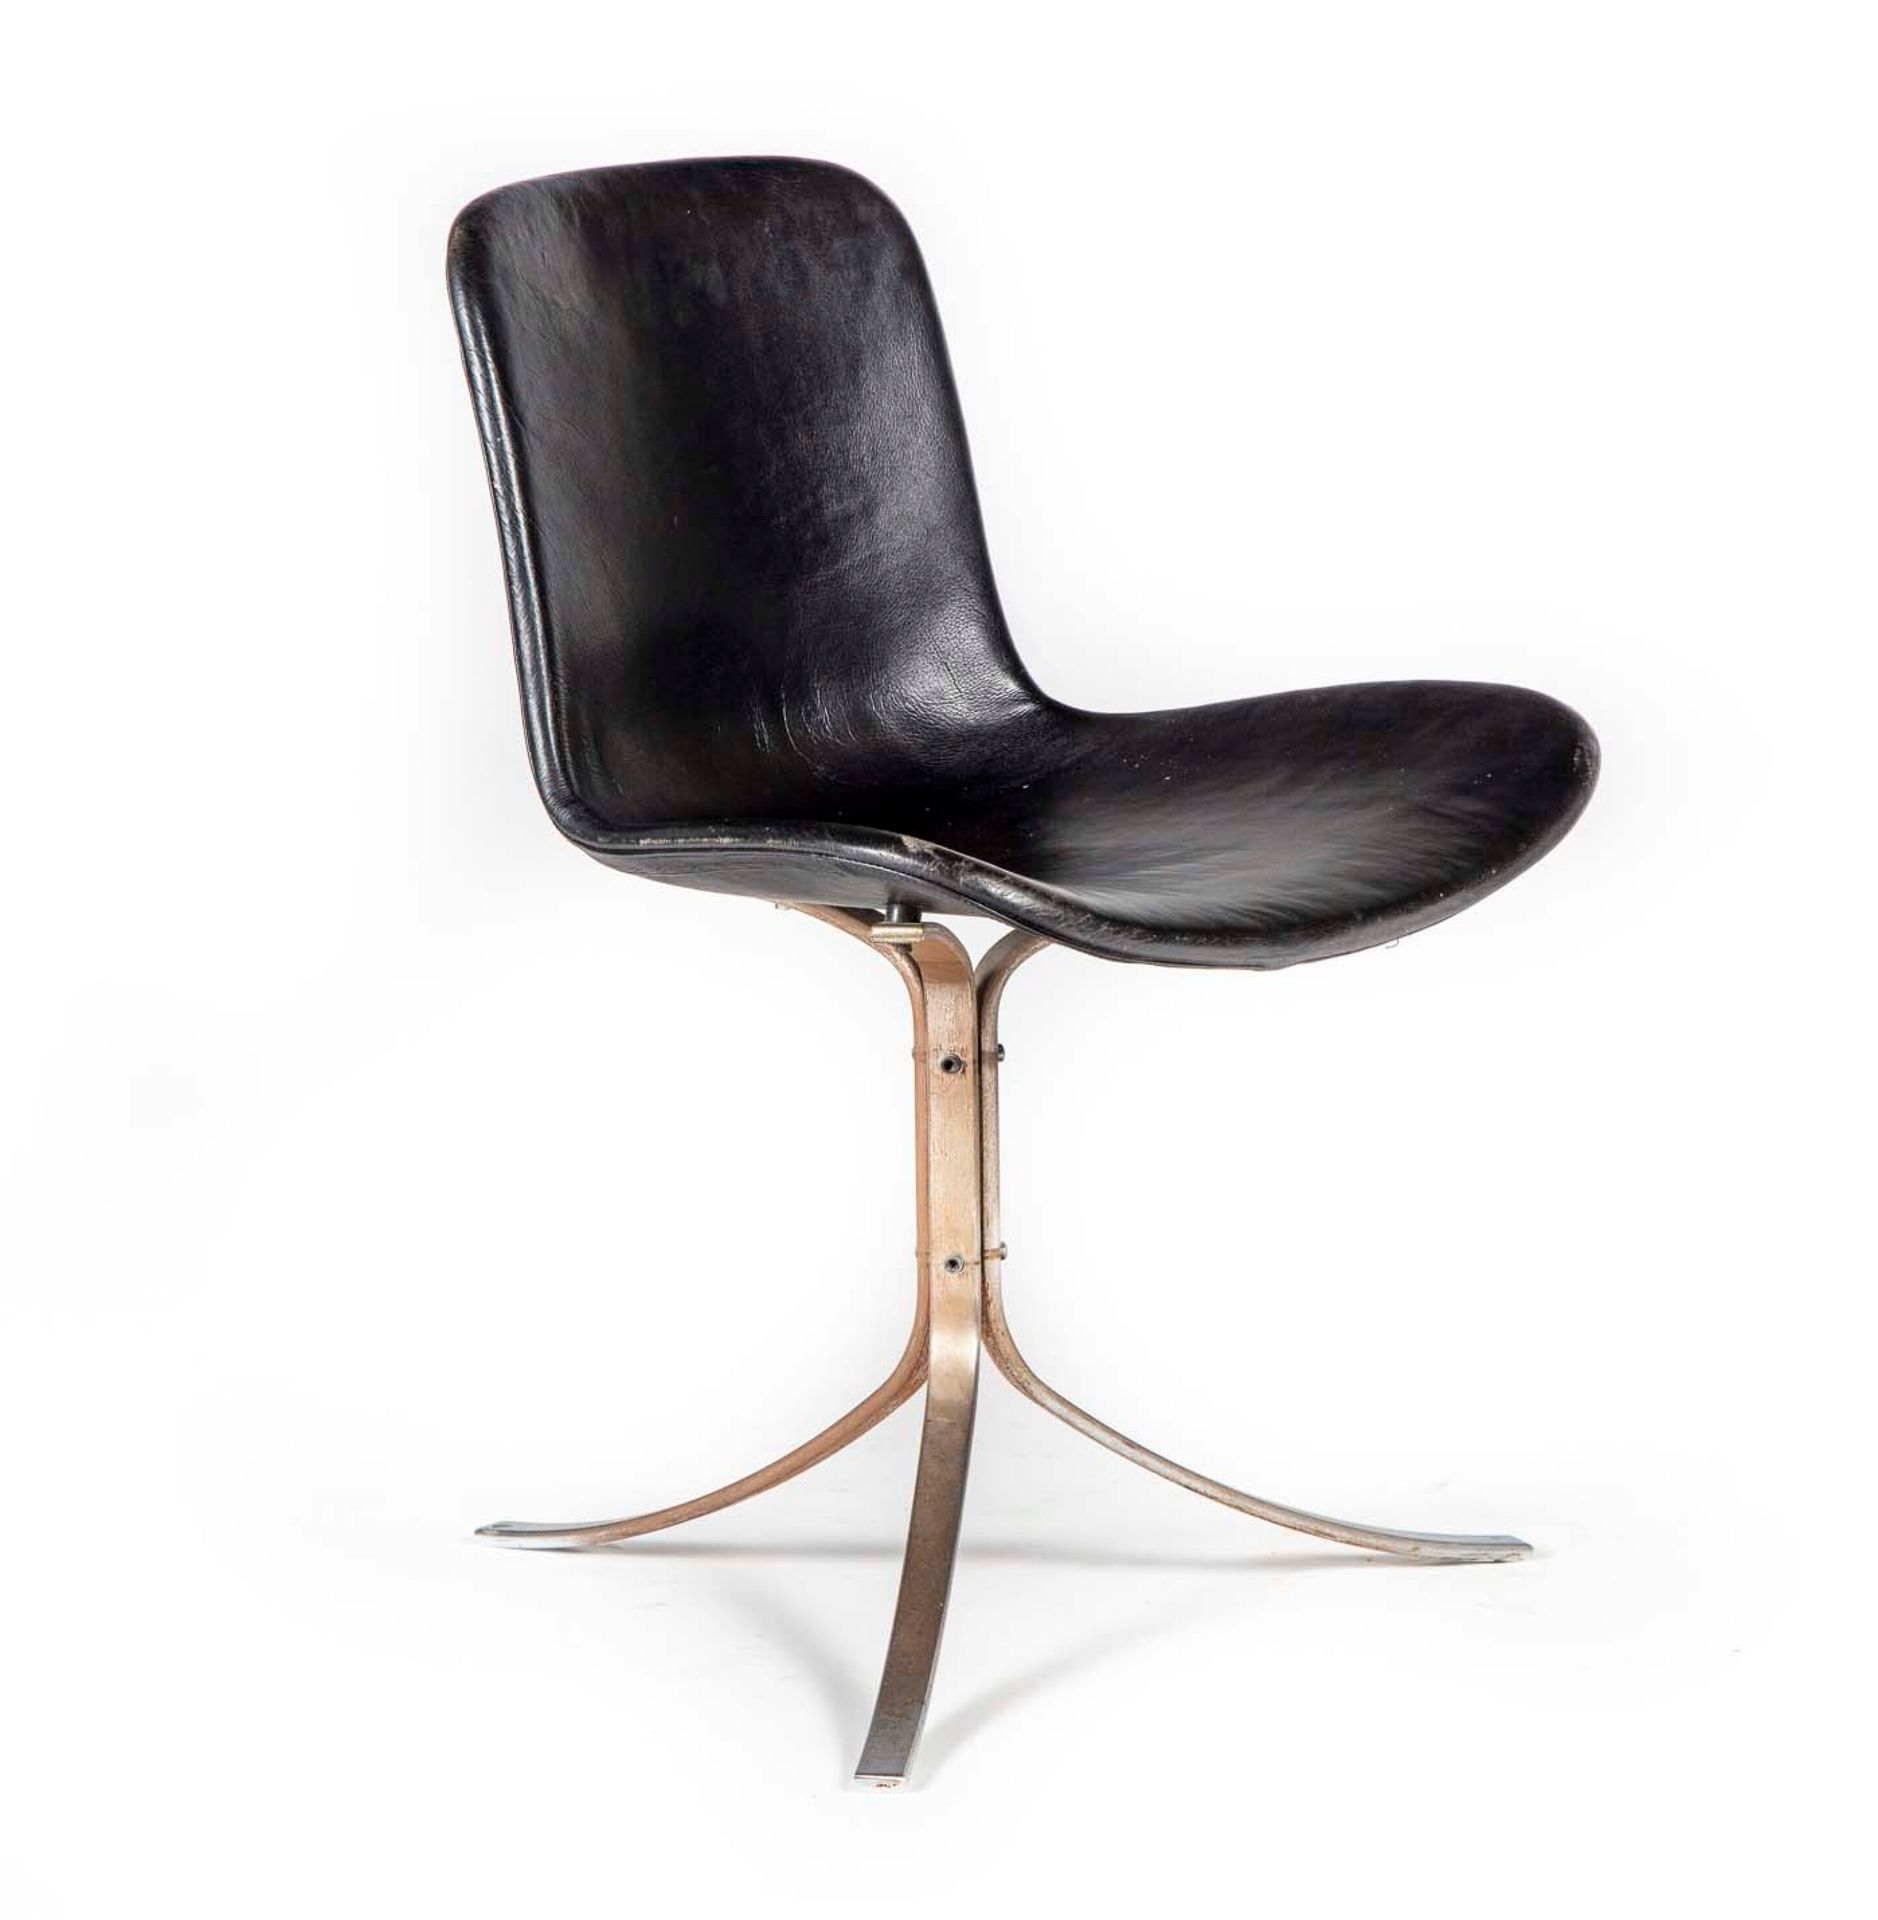 Null Chair with black leather upholstered seat on a steel cross base

Circa 1970